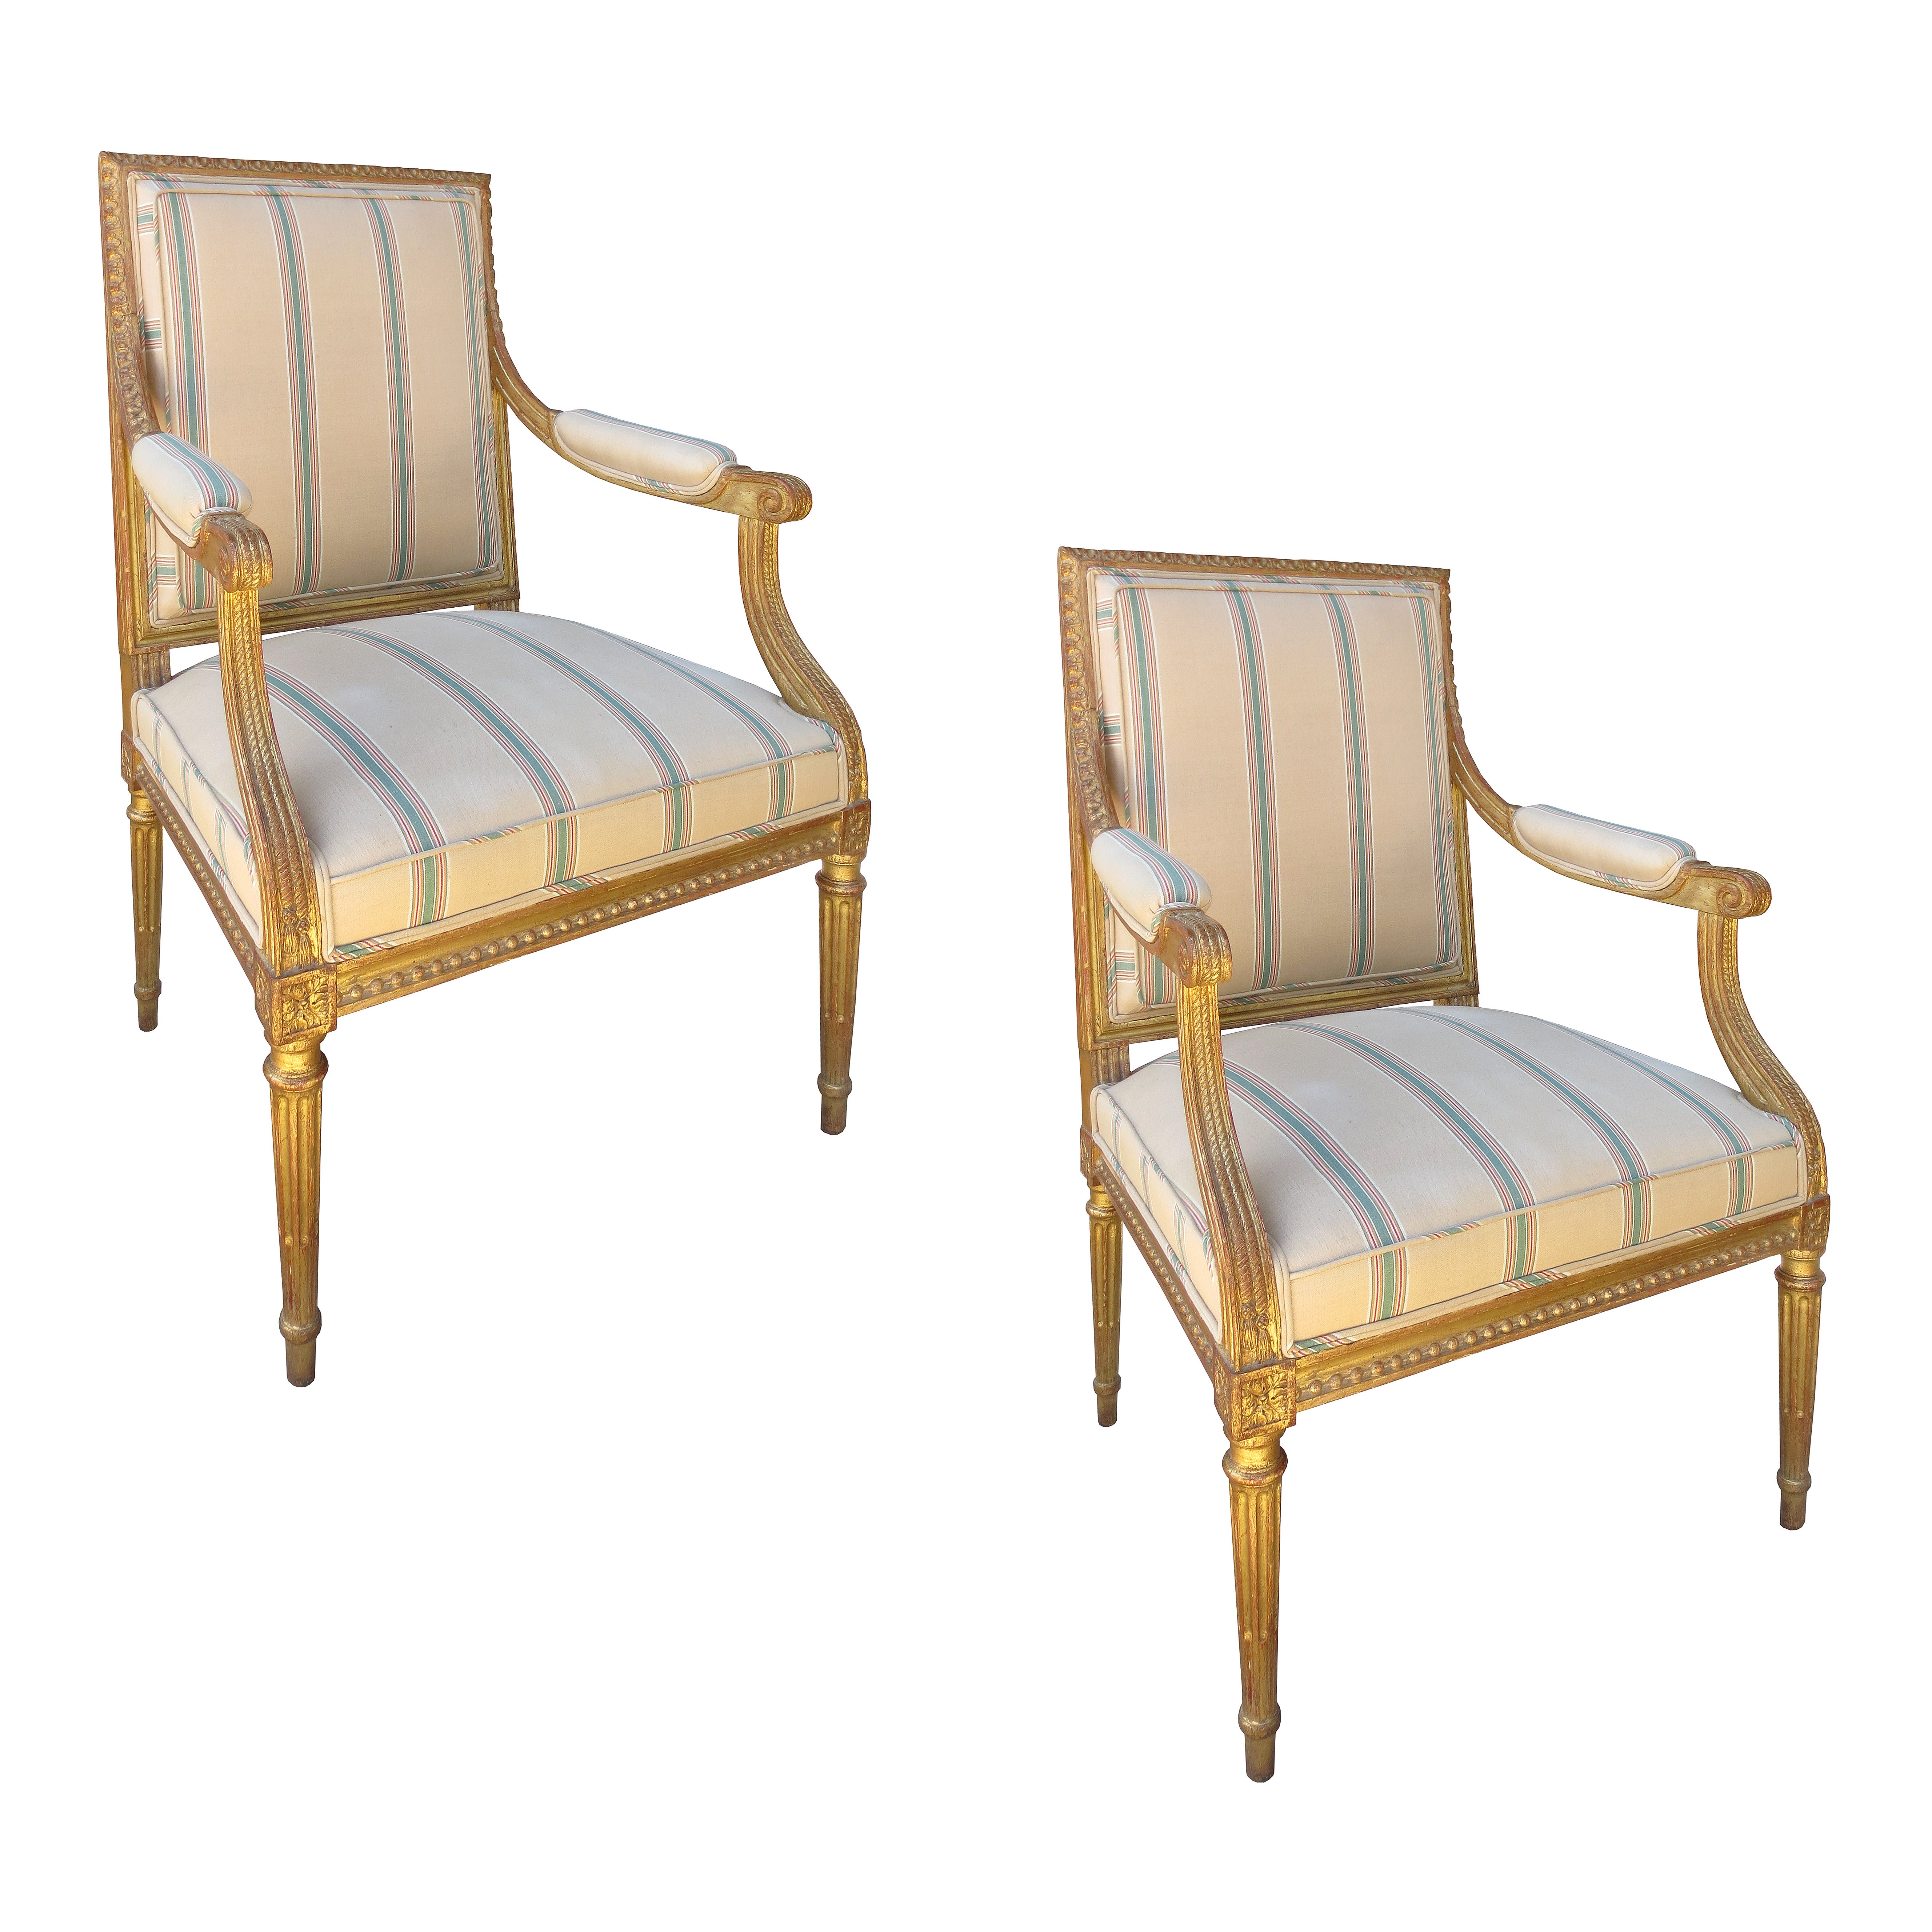 Pair of 19th Century Louis XVI Style Giltwood Fauteuils